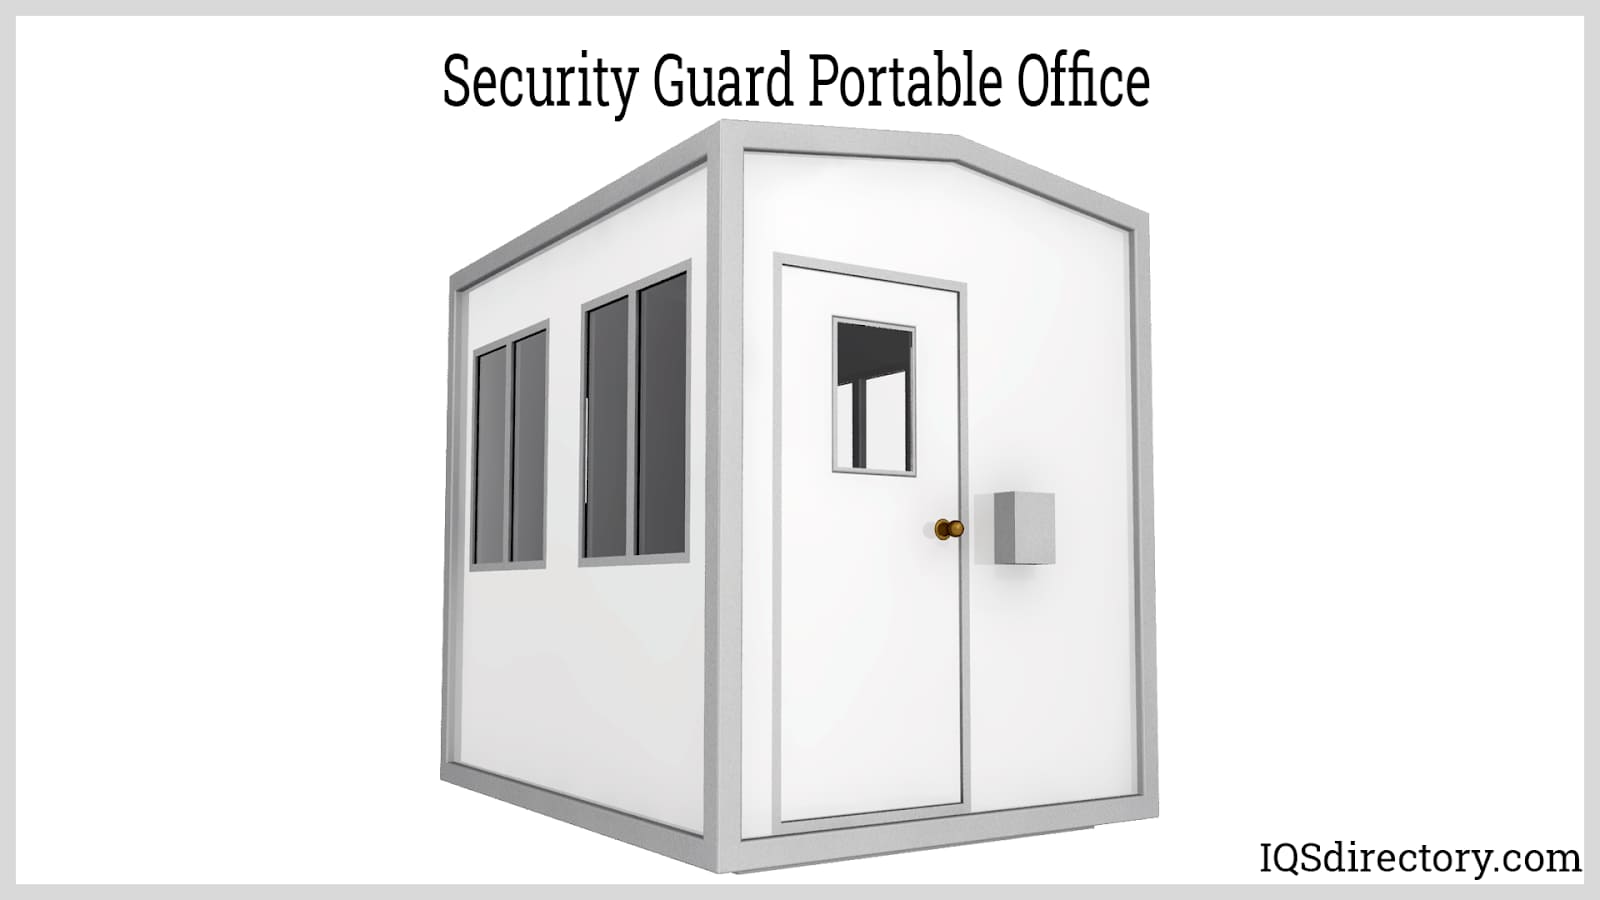 Security Guard Portable Office